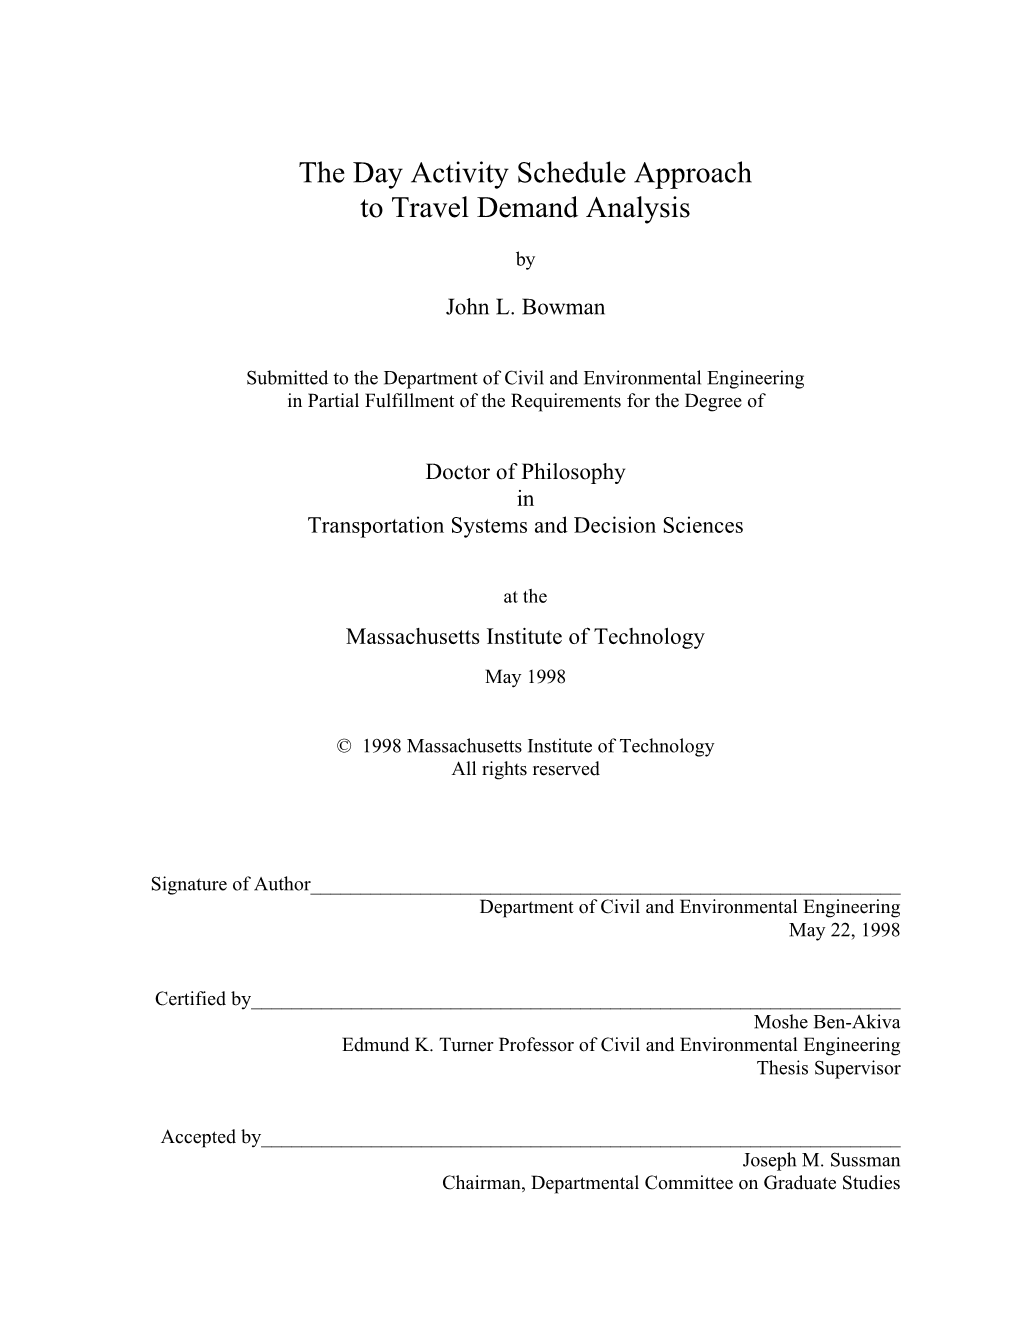 The Day Activity Schedule Approach to Travel Demand Analysis